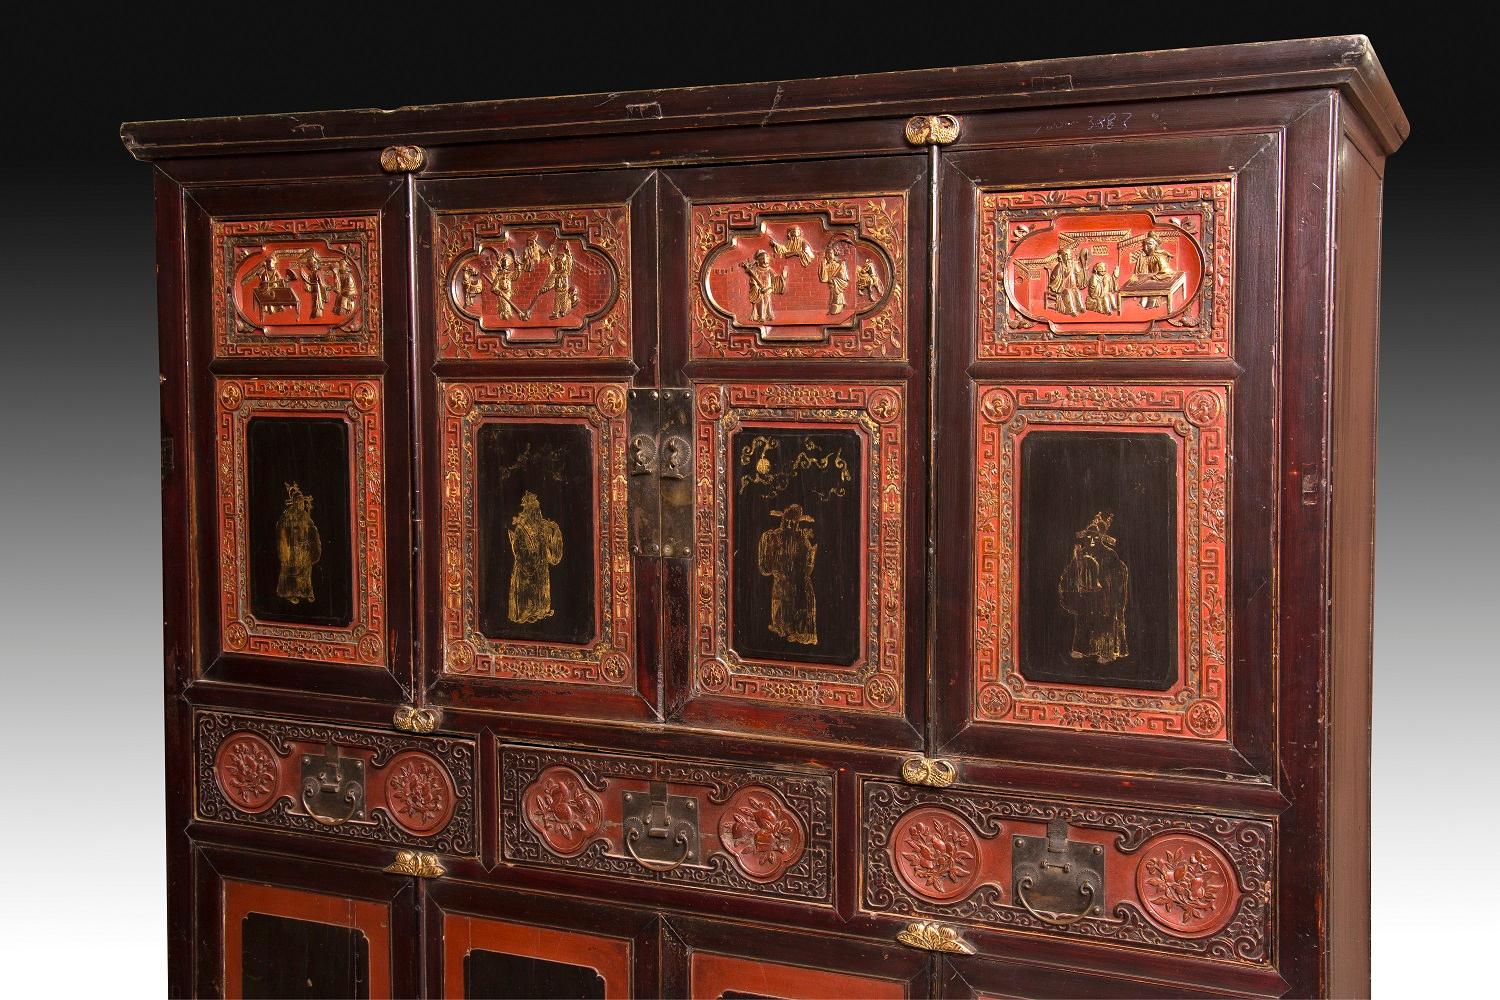 Wardrobe with four bodies and double height made of carved wood, polychrome and gold, rectangular, slightly raised on legs and topped by a simple molding. The lack of decoration on the sides leaves the prominence that deserves a very worked front: